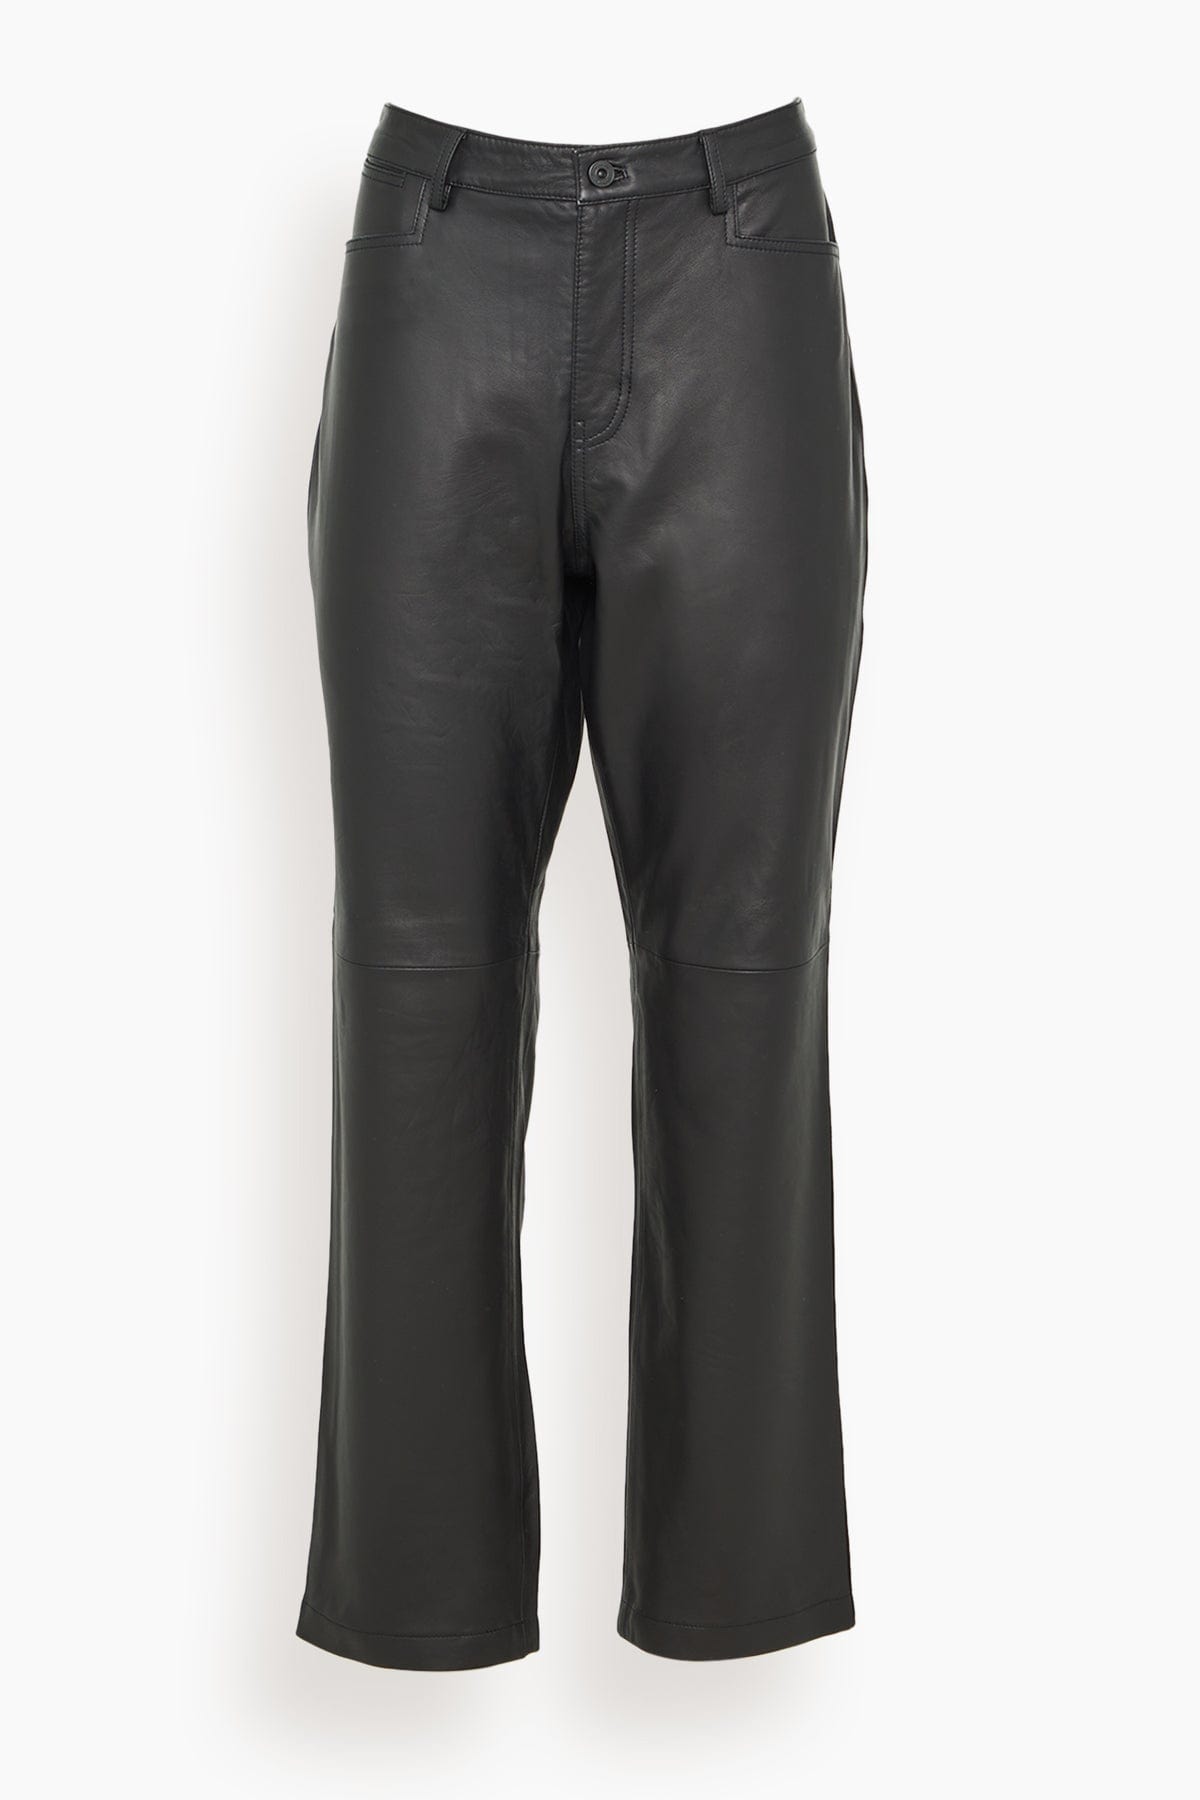 Proenza Schouler White Label Leather Straight Pant in Black - Black - Size: 8